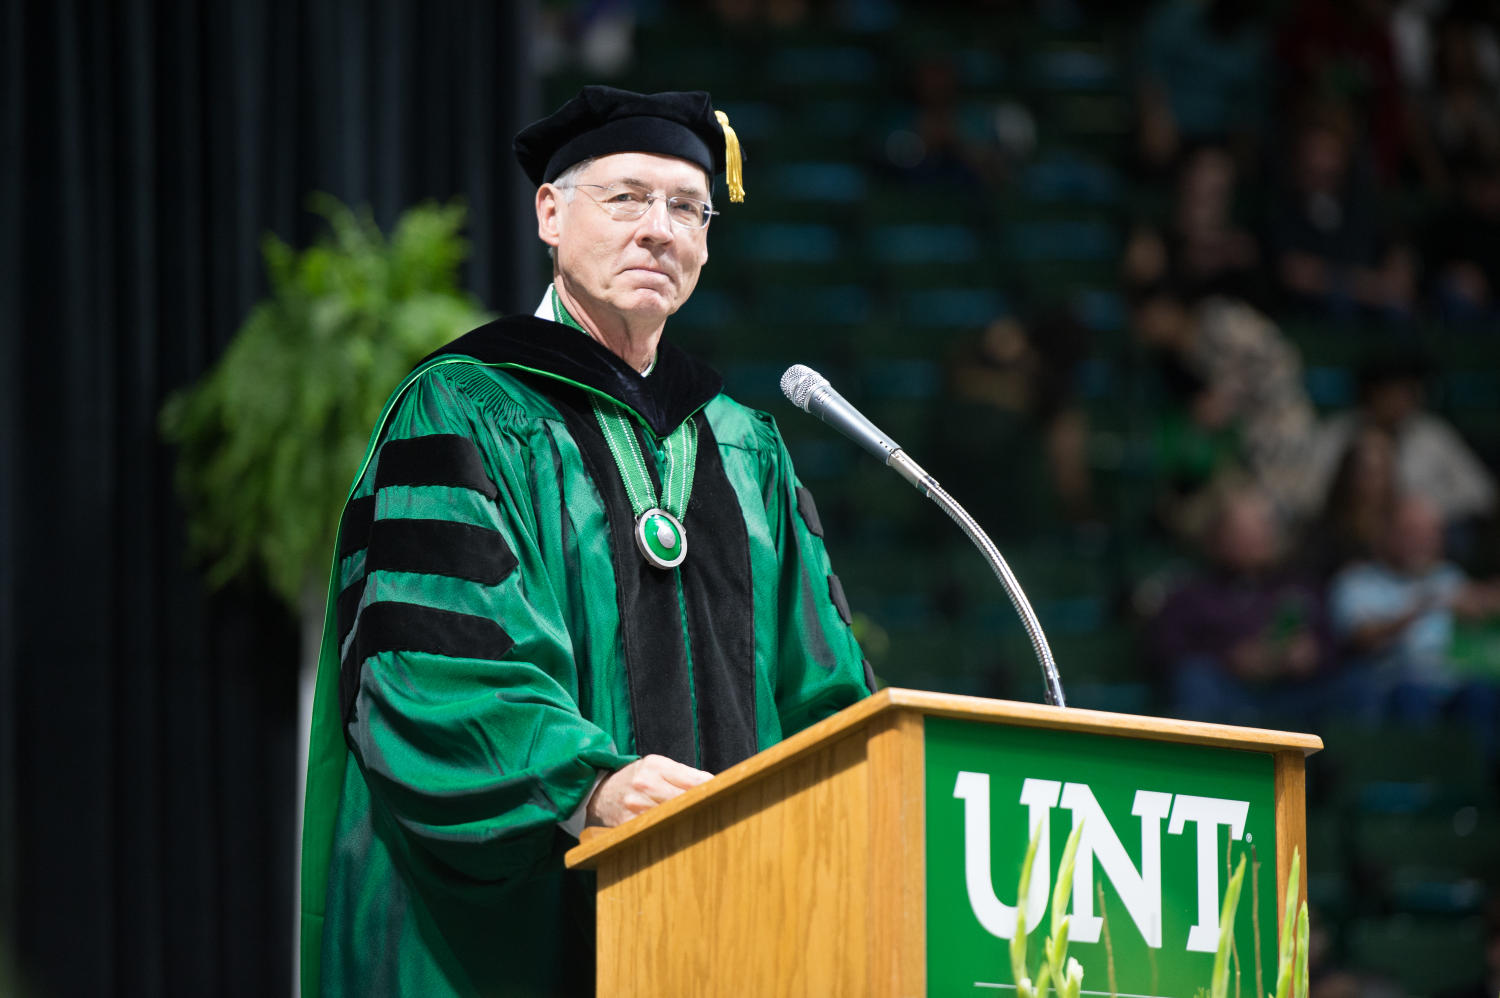 [Faculty Member Standing At Podium During Commencement Ceremony]
                                                
                                                    [Sequence #]: 1 of 1
                                                